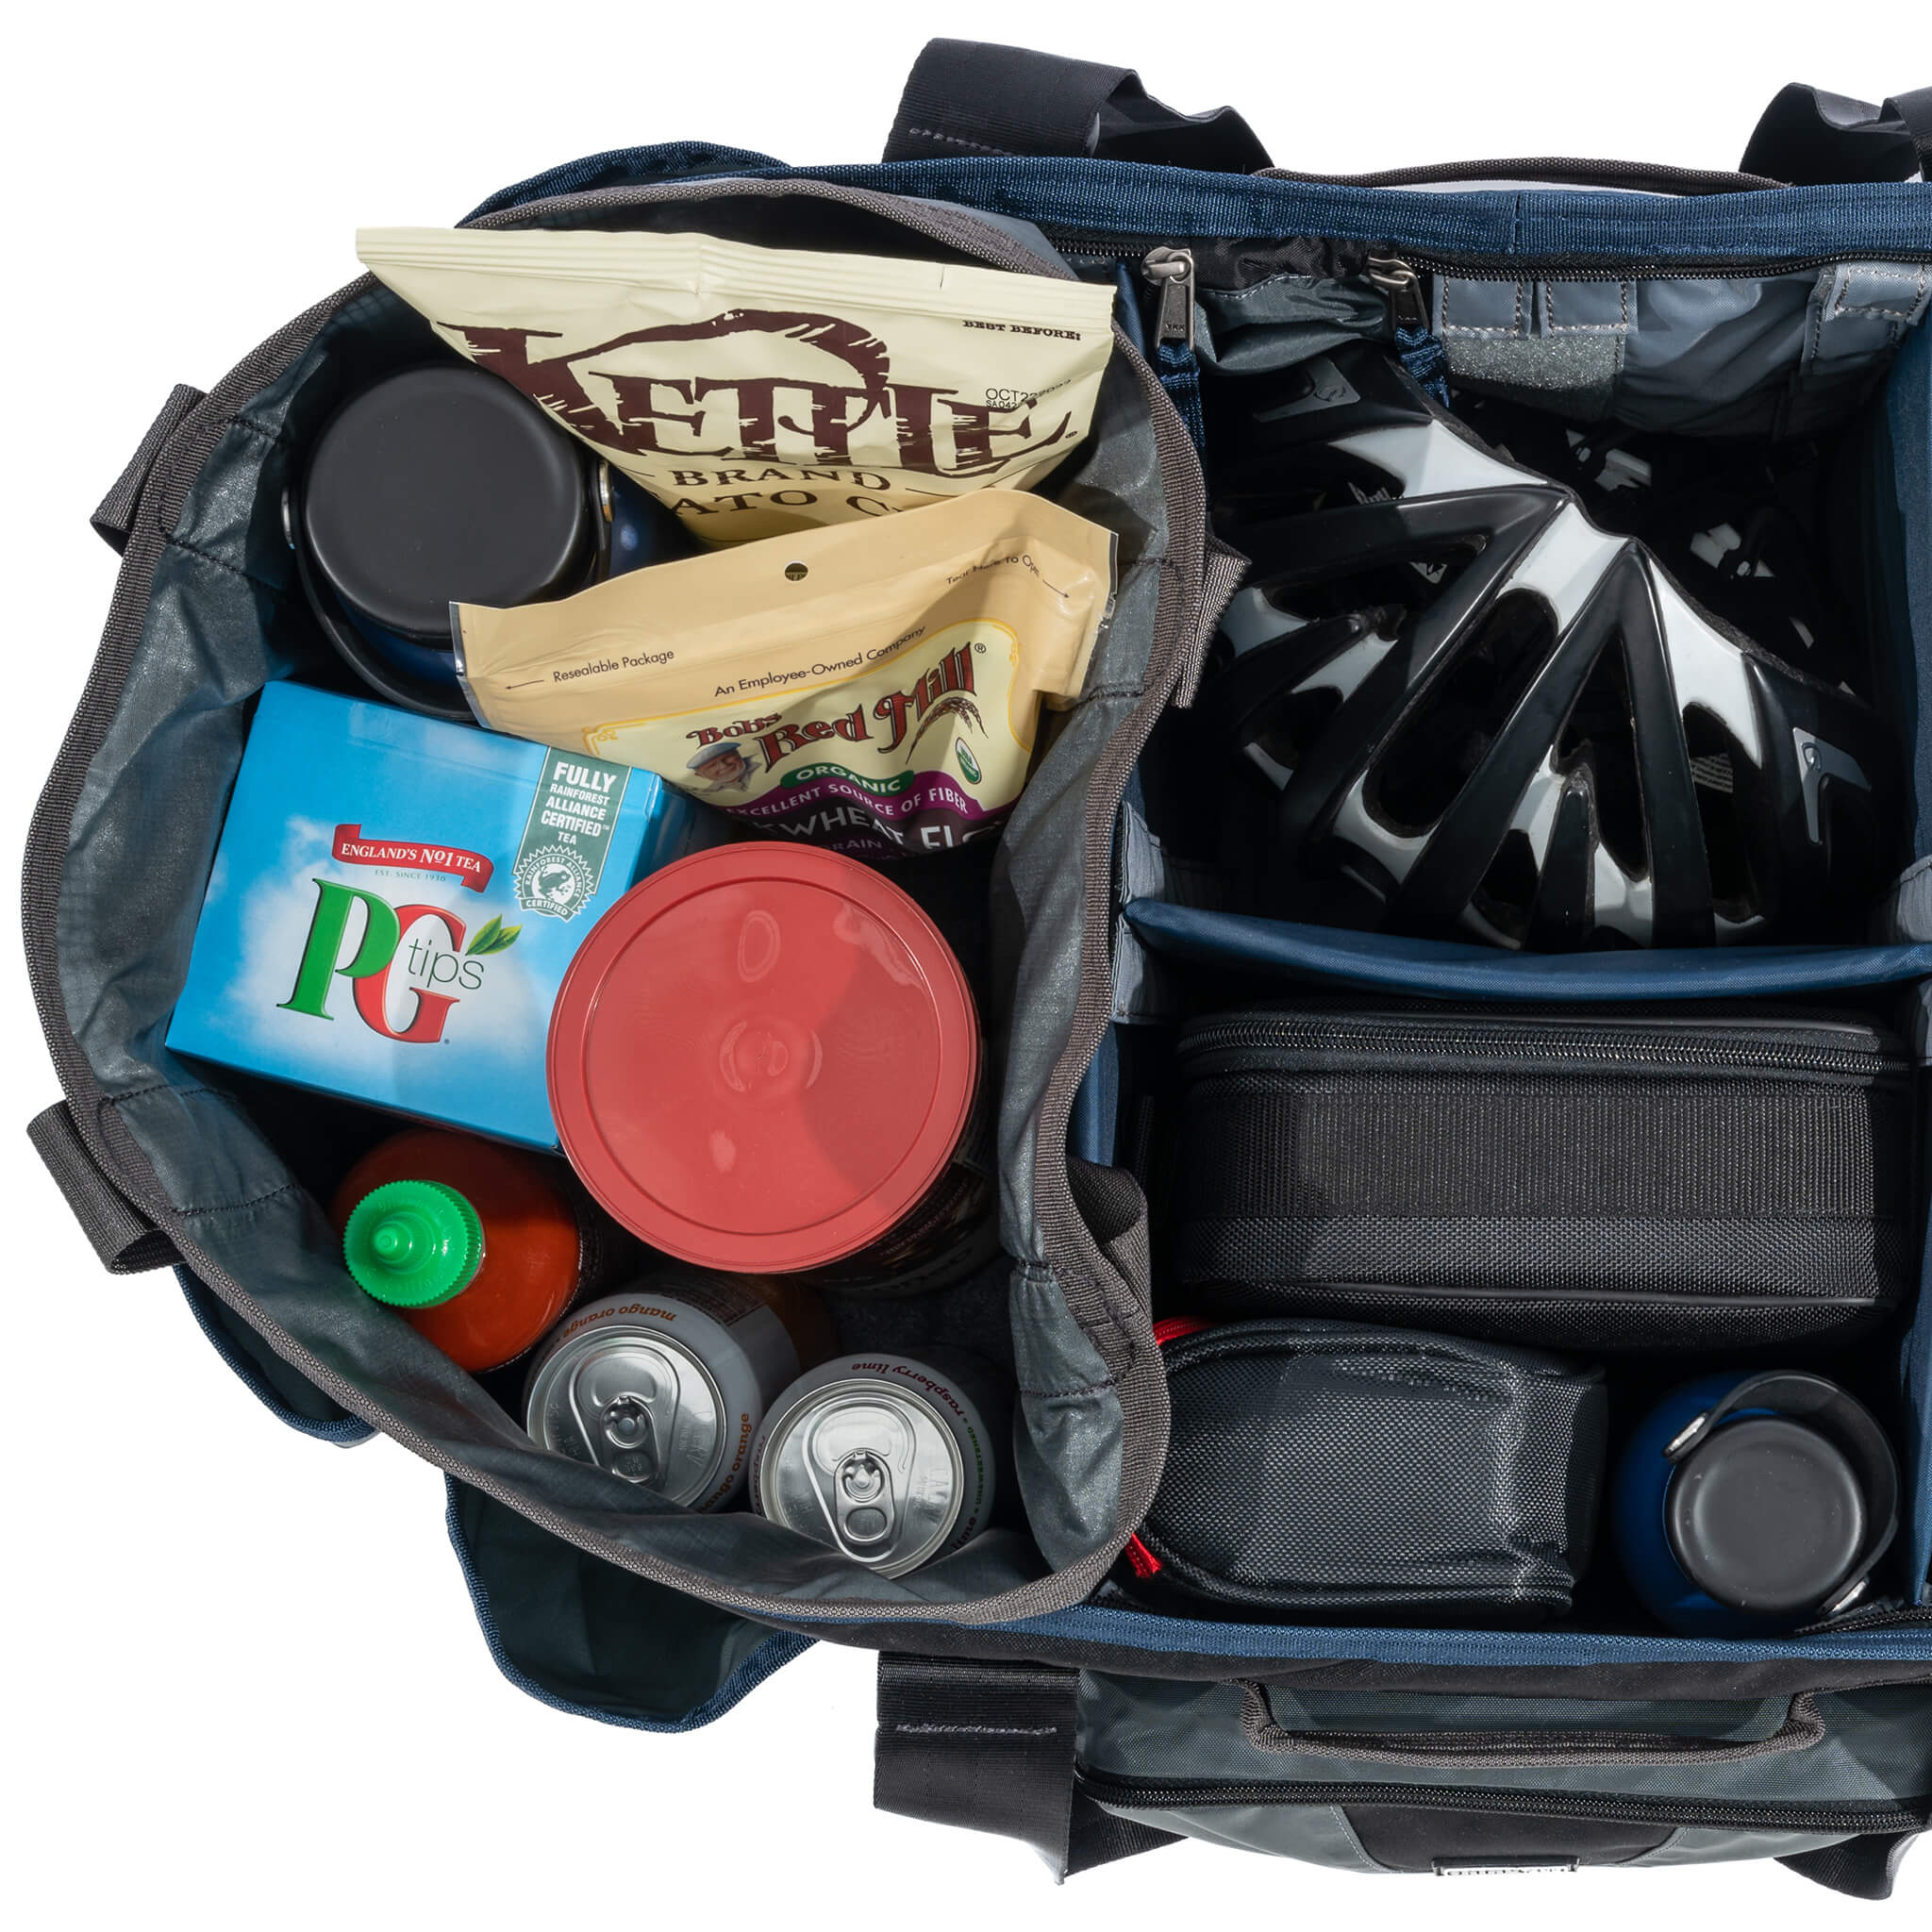 Fits perfectly in main compartment of the Freeway Longhaul Carryall Duffel